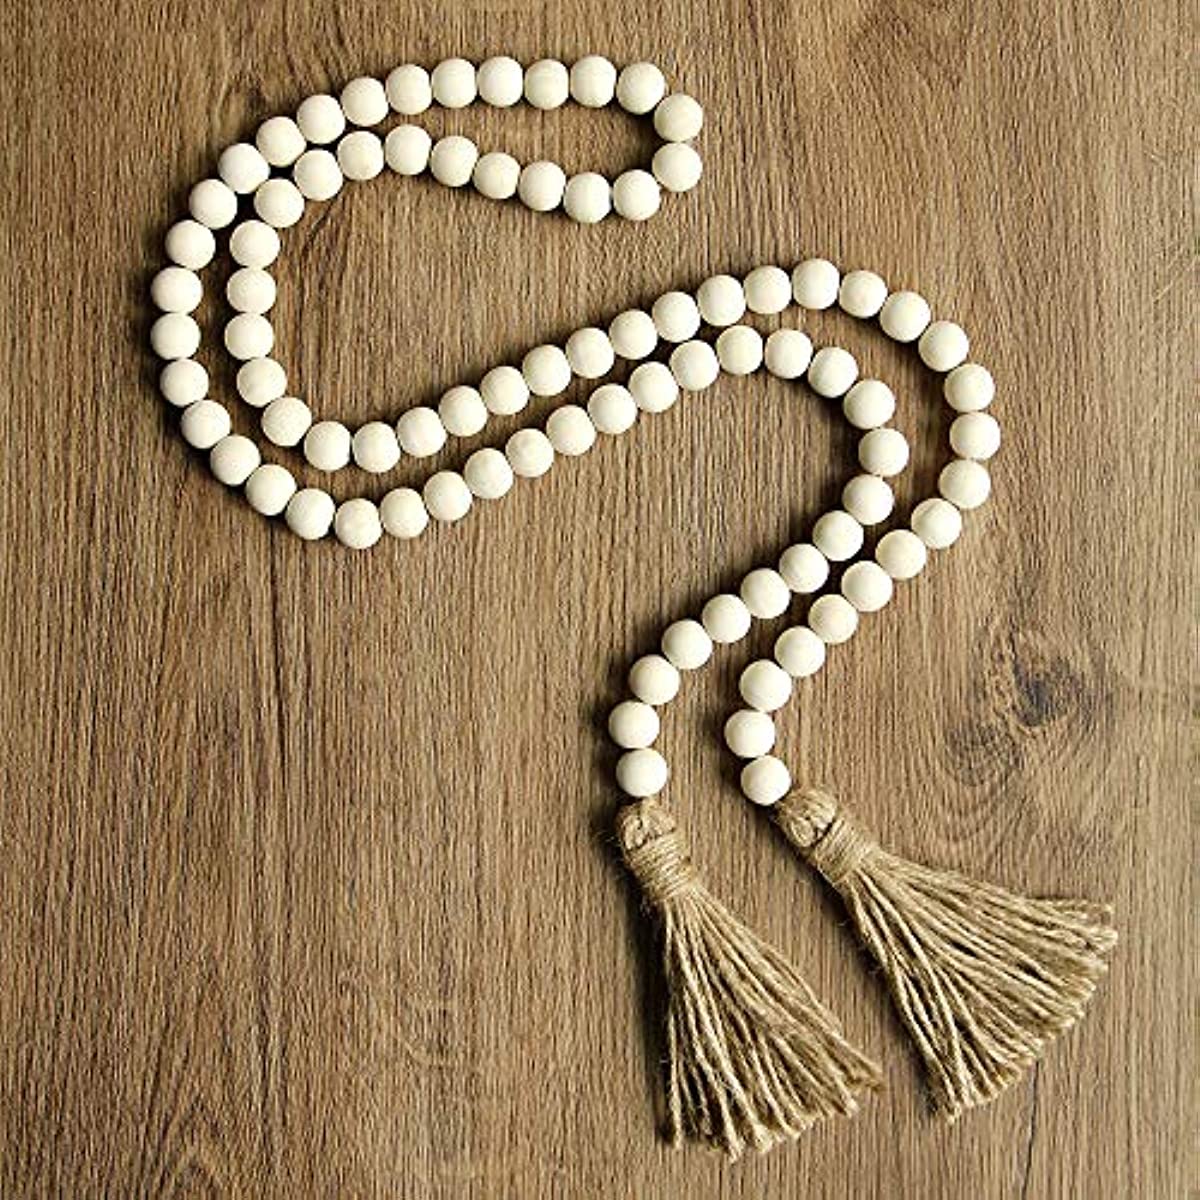 MEETYAMOR Boho Decor Wood Beads Garland, 58 Inch Wooden Beads for Farmhouse  Home Decor with Tassels, Rustic Country Decor for Coffee Table, Wall